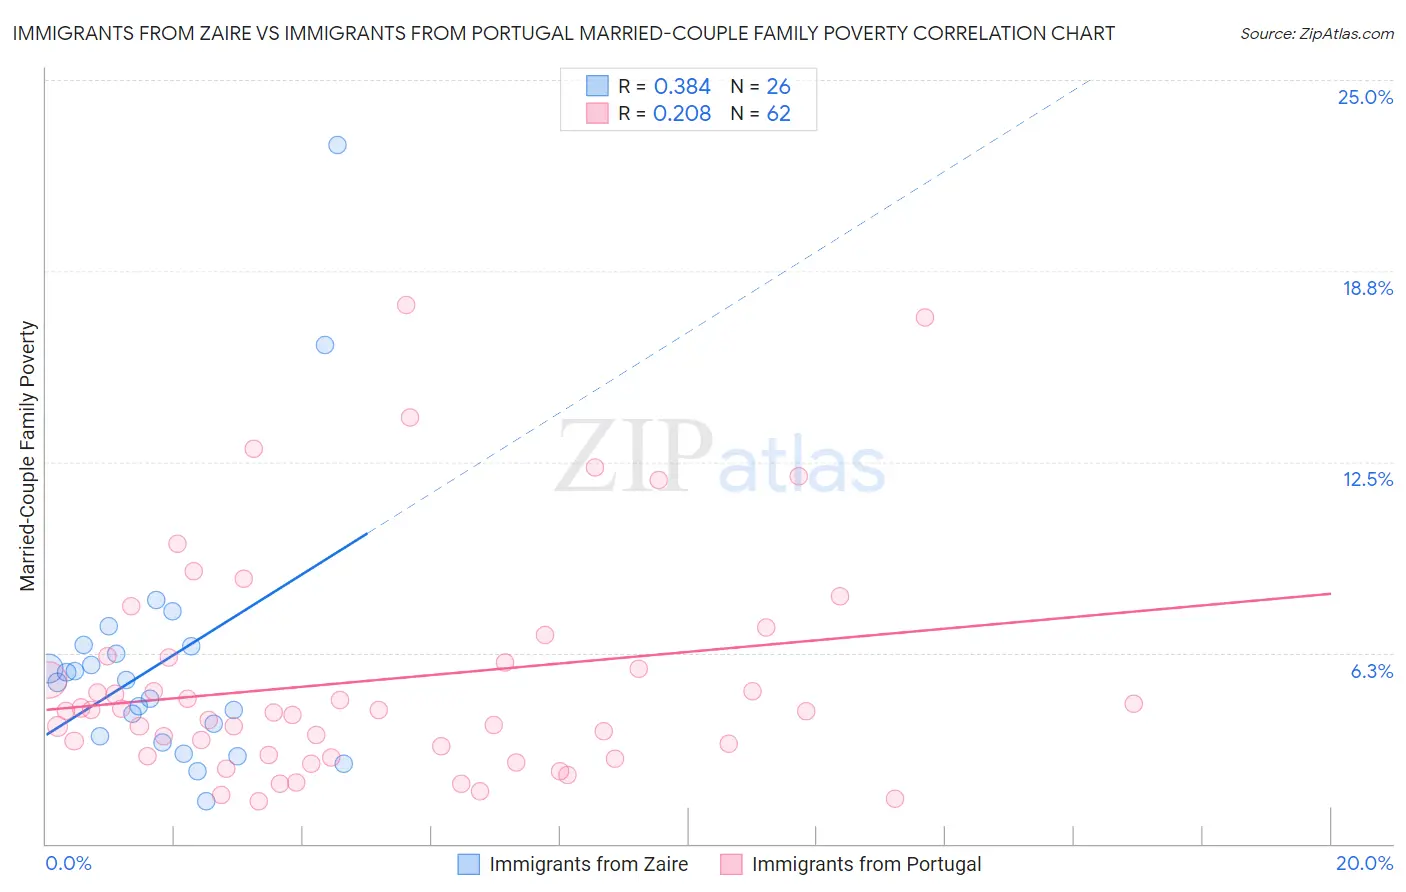 Immigrants from Zaire vs Immigrants from Portugal Married-Couple Family Poverty